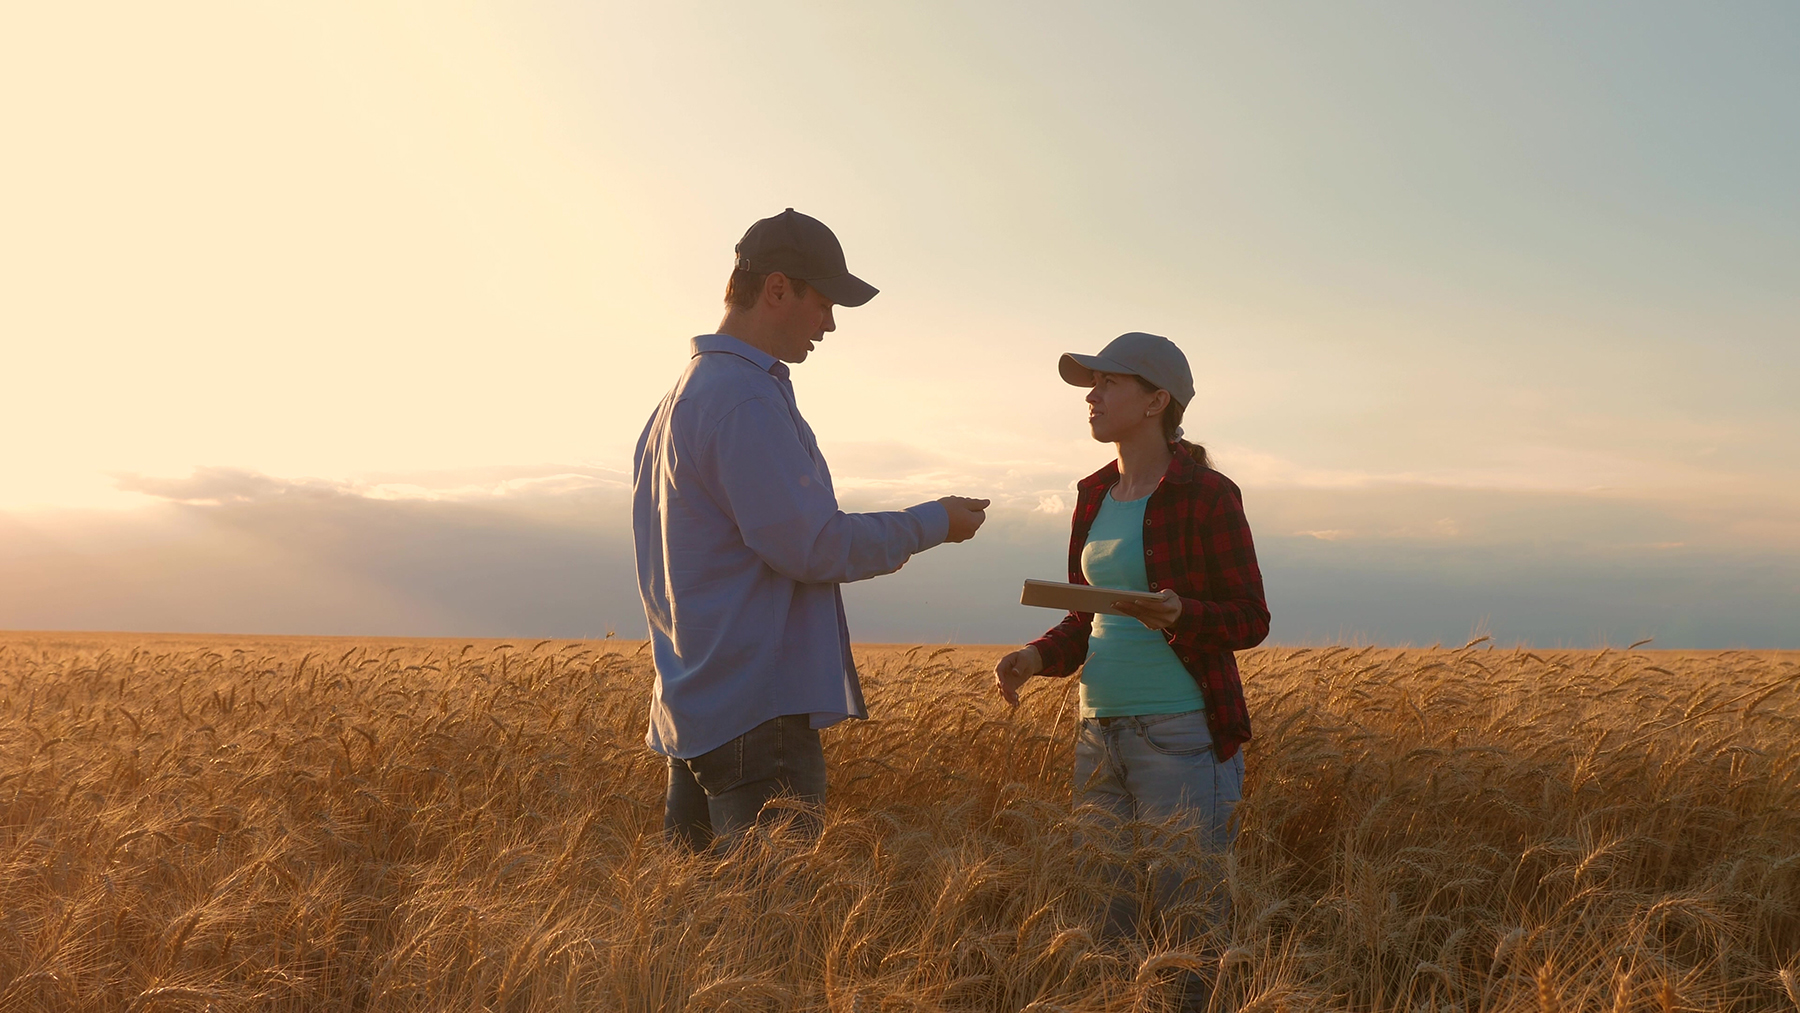 Farmers male and female working with a tablet in a wheat field, in the sunset light. businessmen studies income in agriculture. agronomists with tablet study wheat crop in field. agriculture concept.; Shutterstock ID 1496027000; purchase_order: -; job: -; client: -; other: -